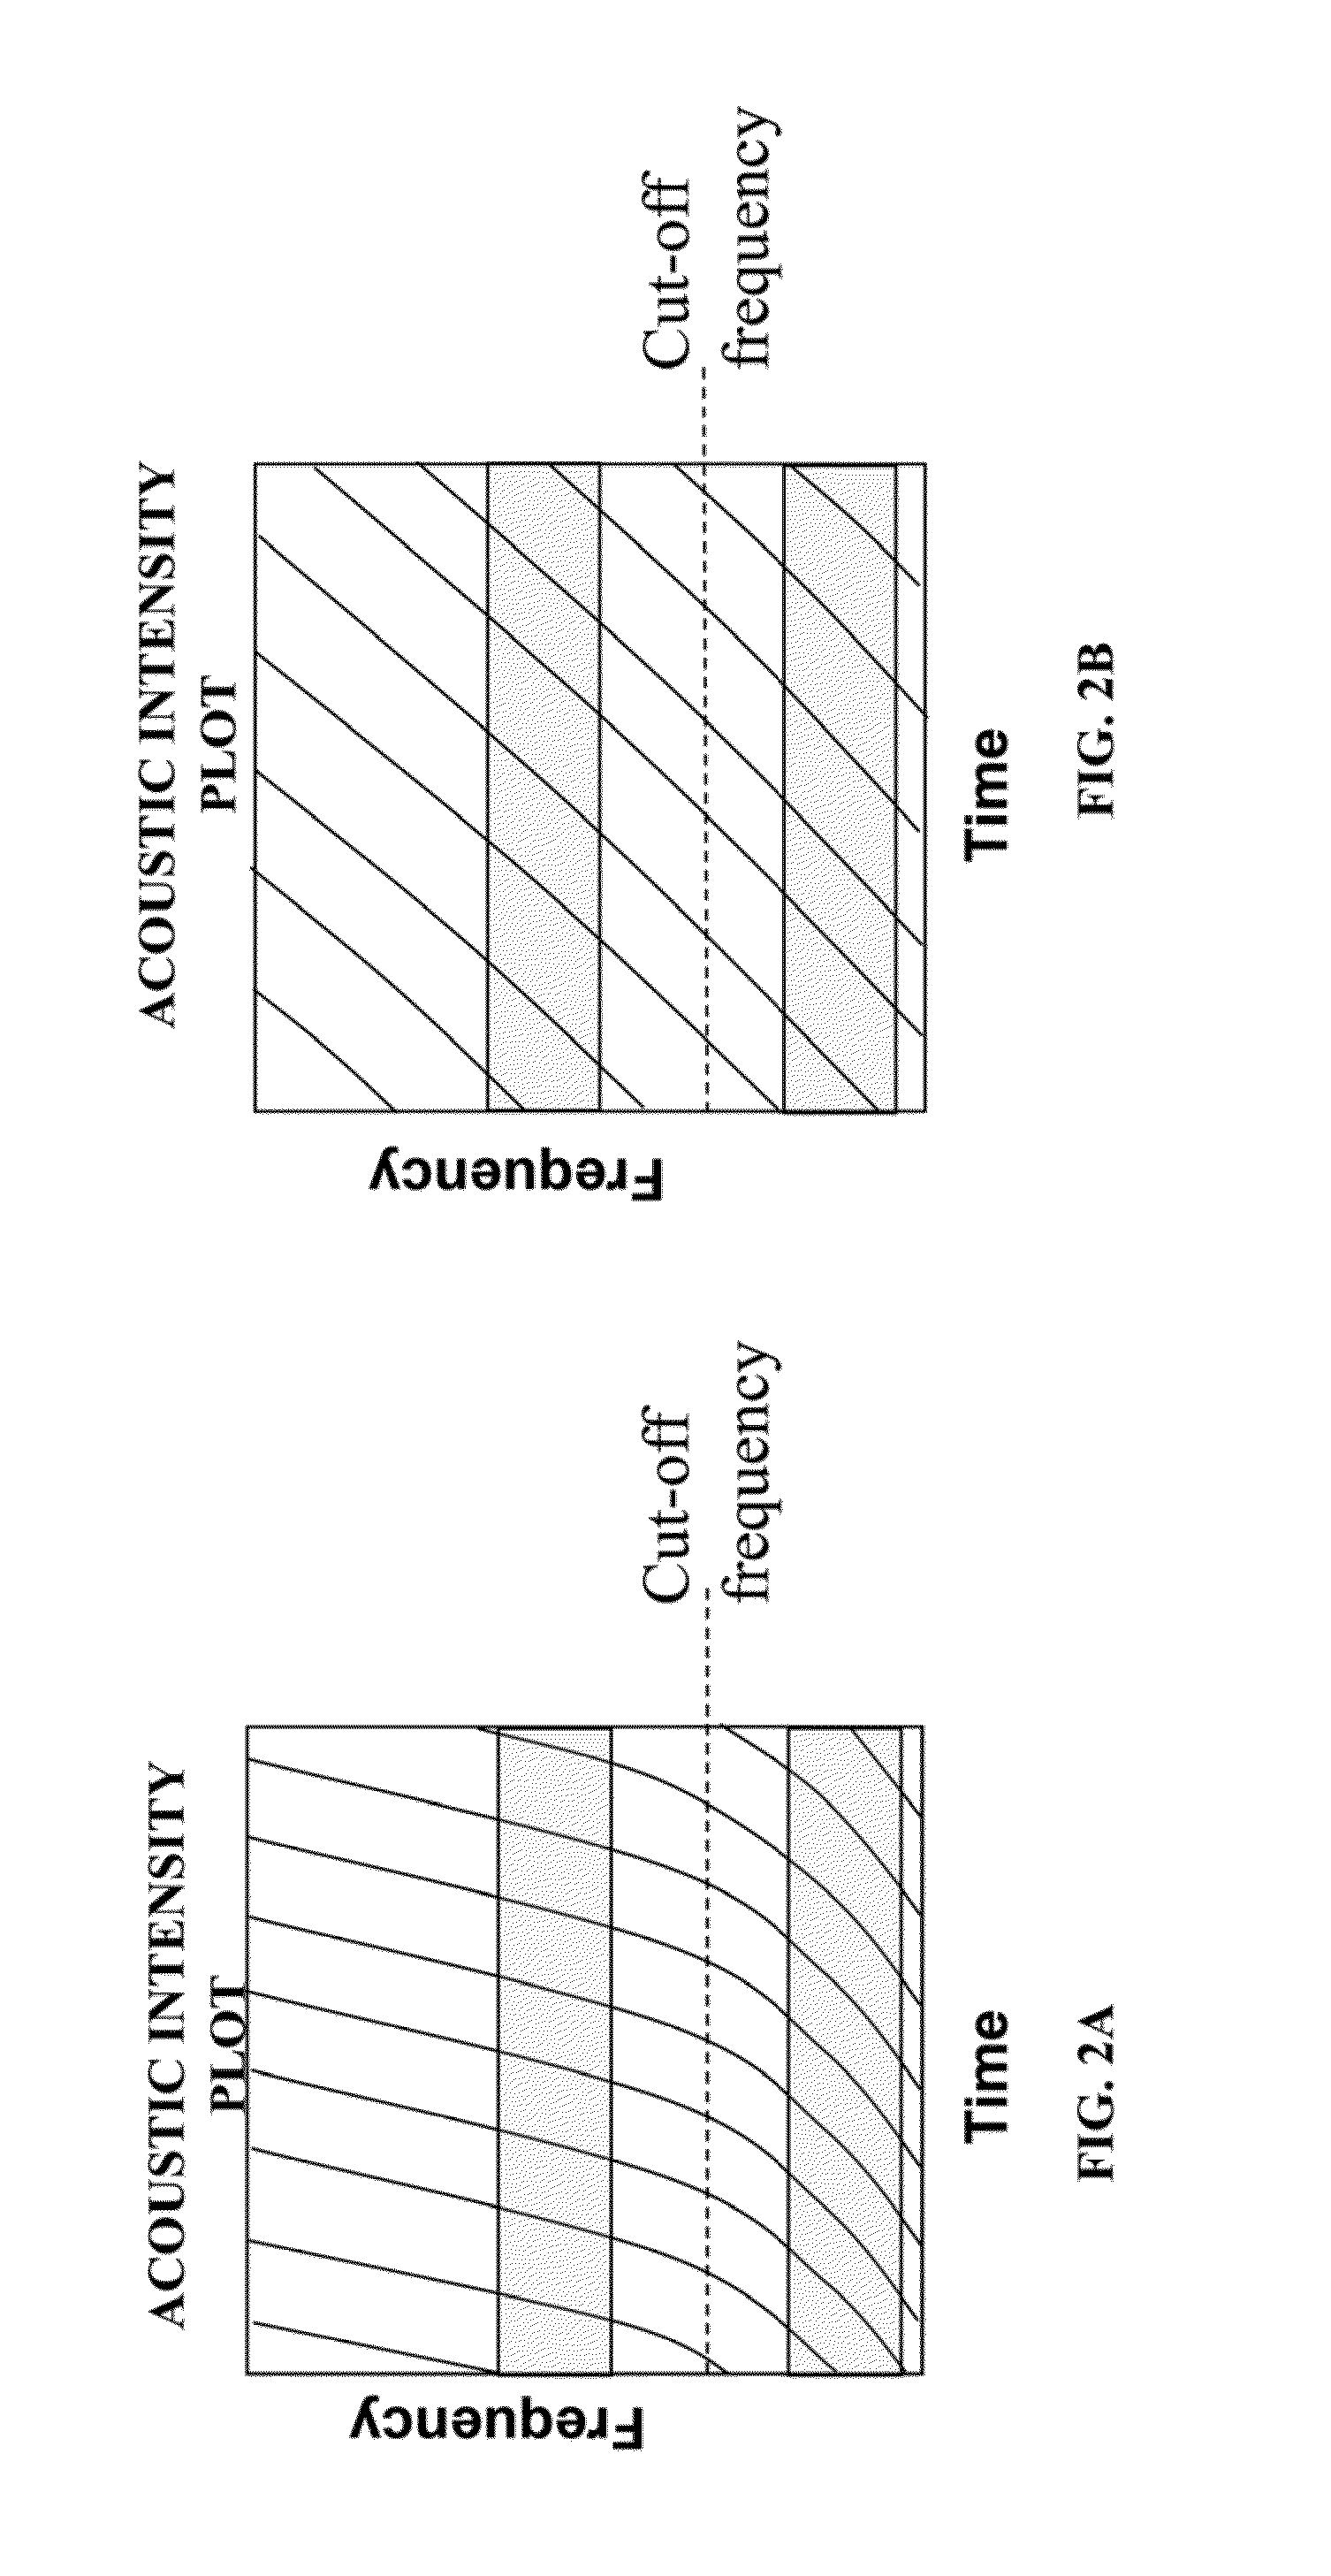 Method of passive acoustic depth determination in shallow water